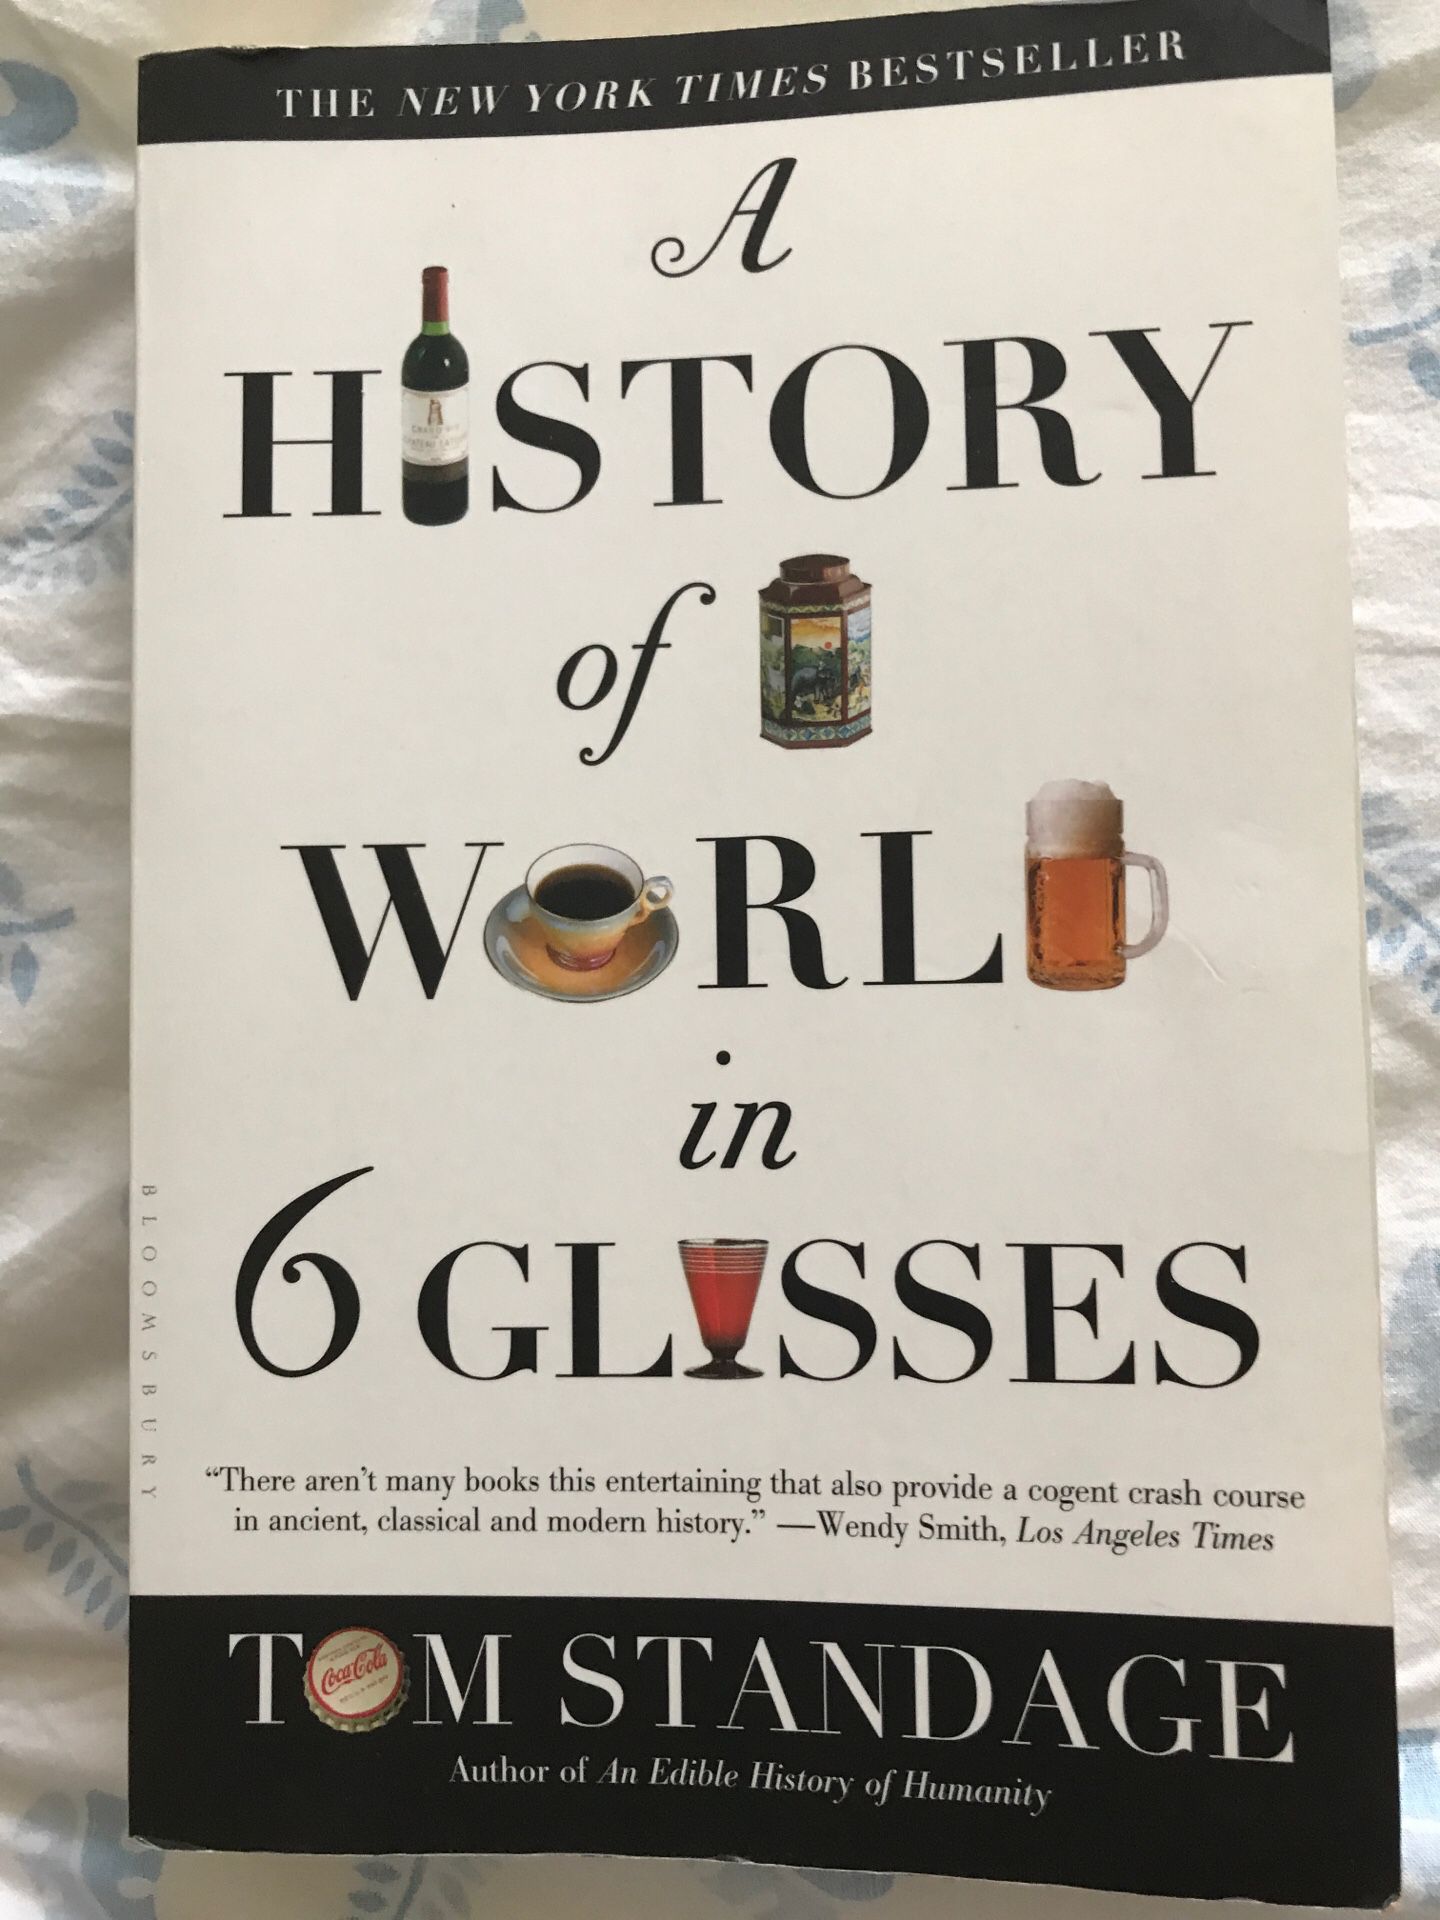 The history of the world in 6 glasses